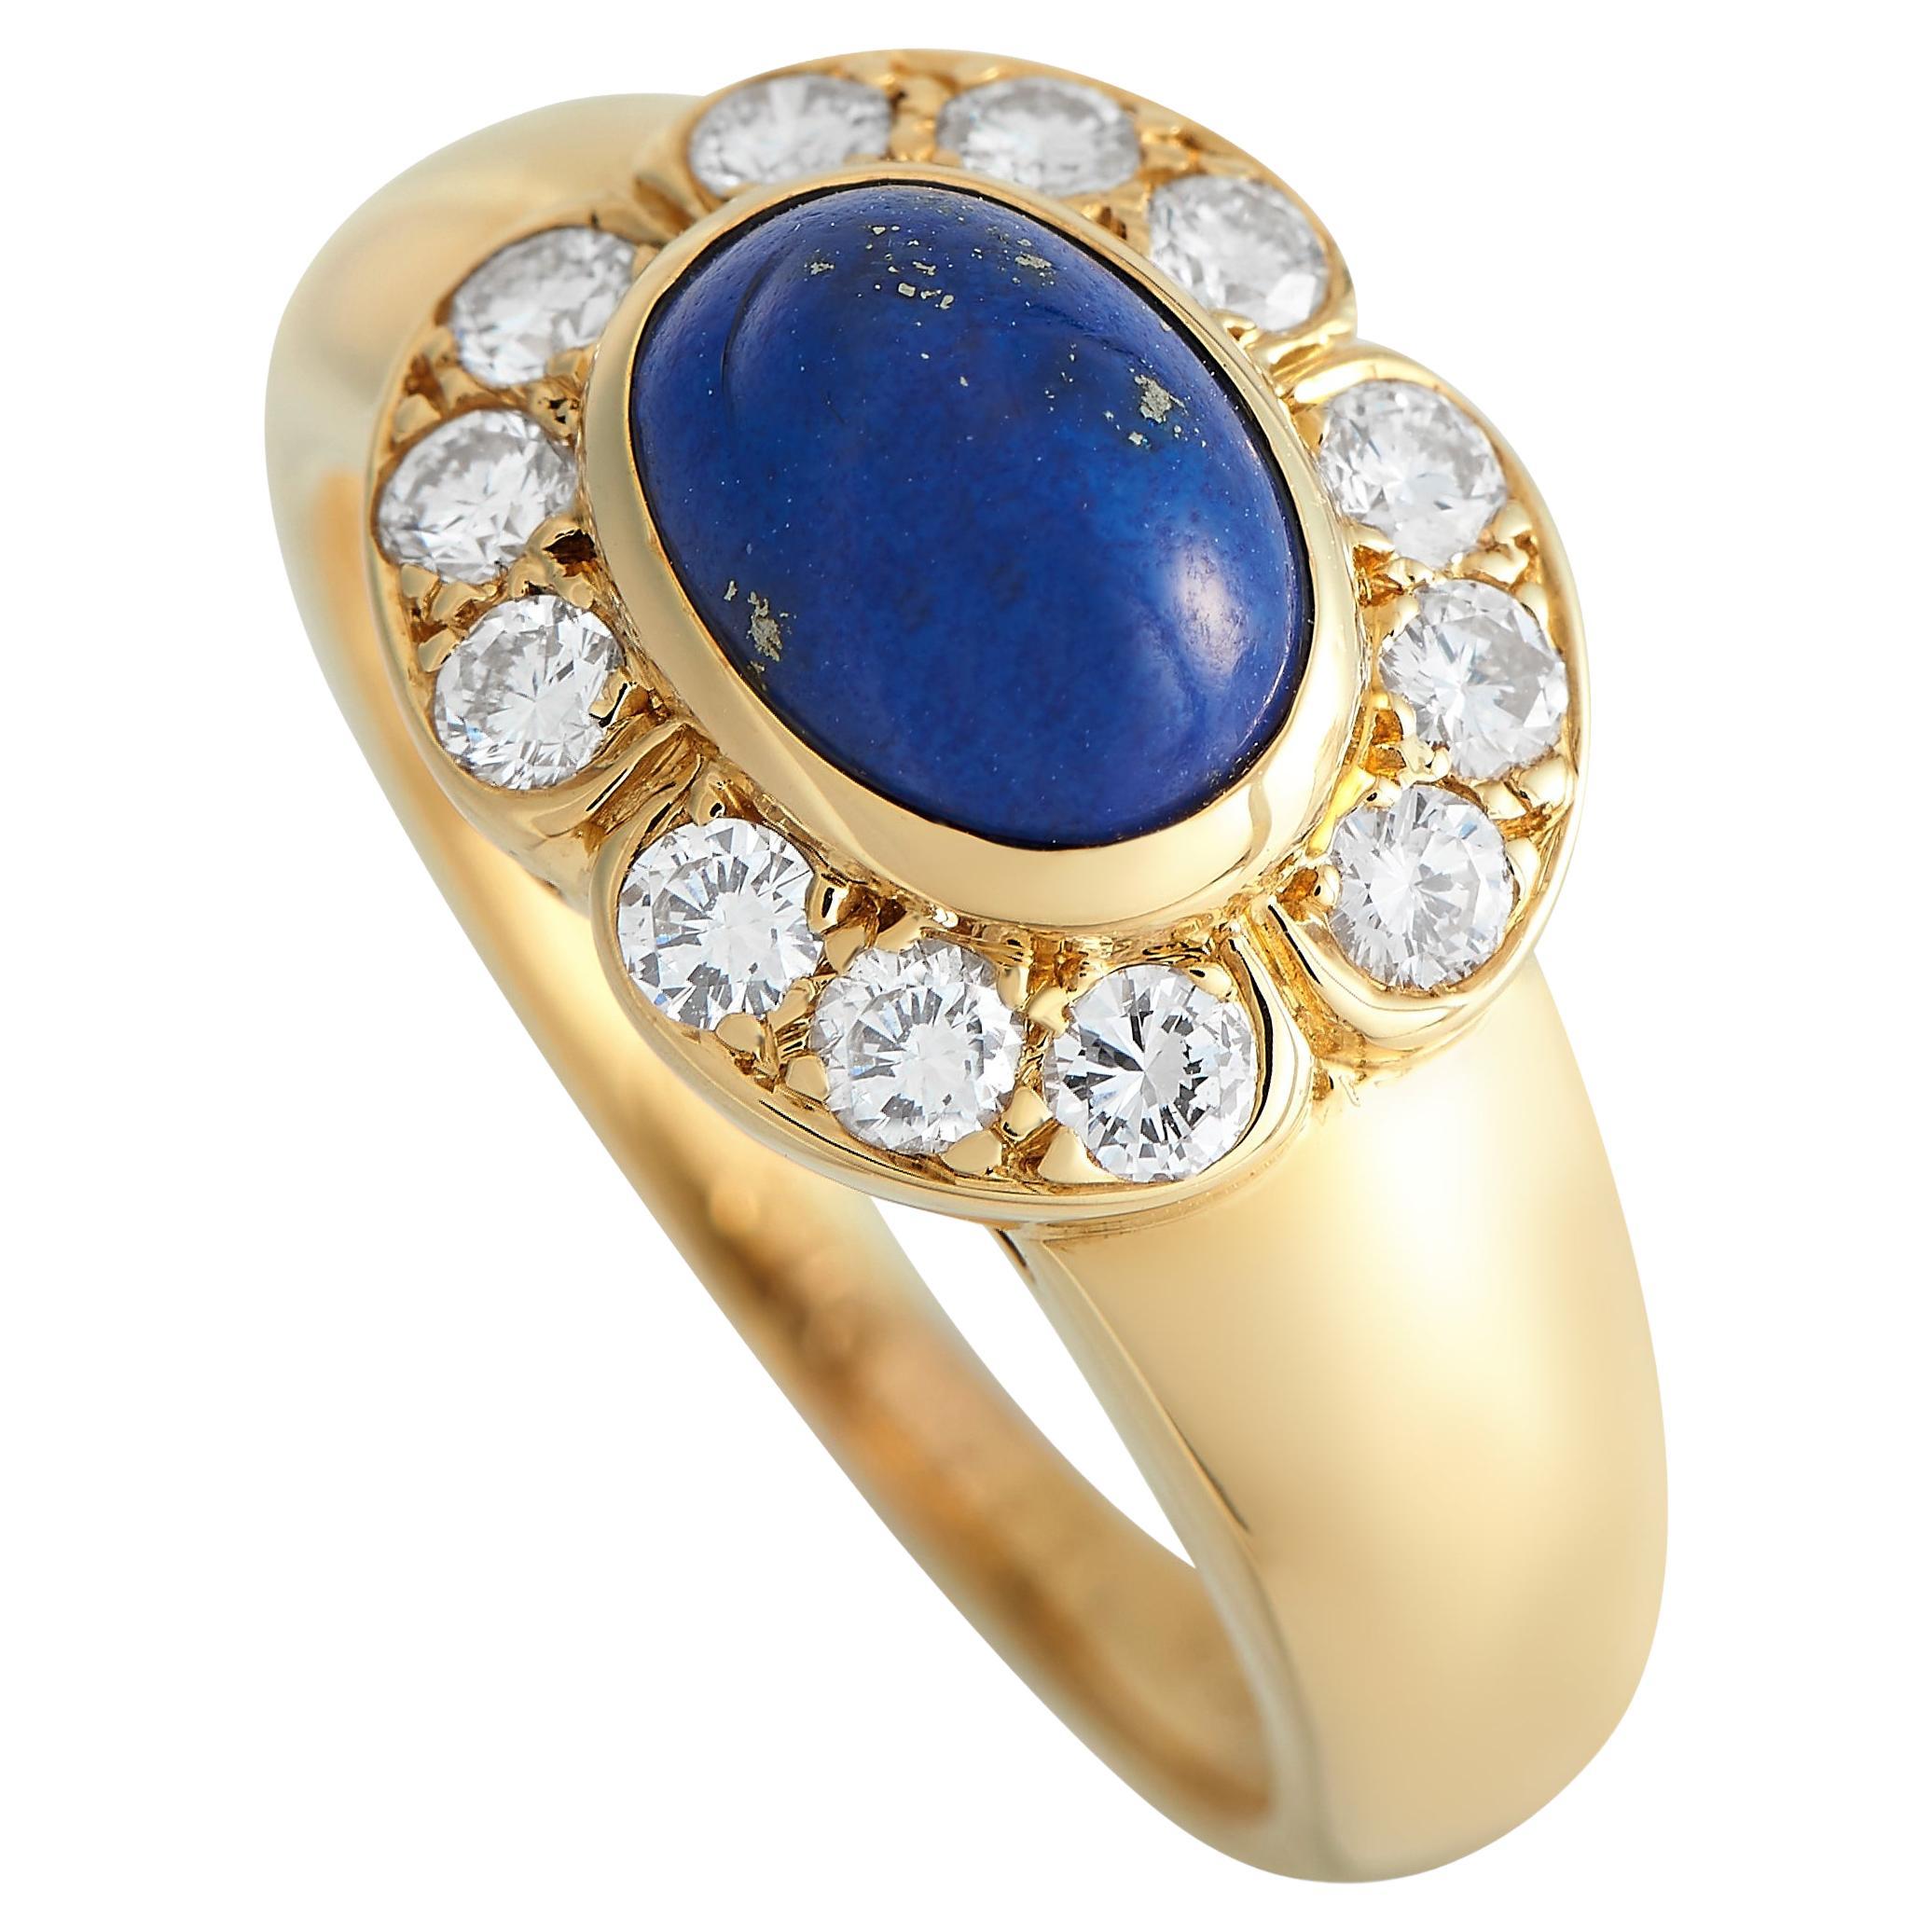 Van Cleef & Arpels 18K Yellow Gold 0.50ct Diamond and Lapis Lazuli Ring For Sale